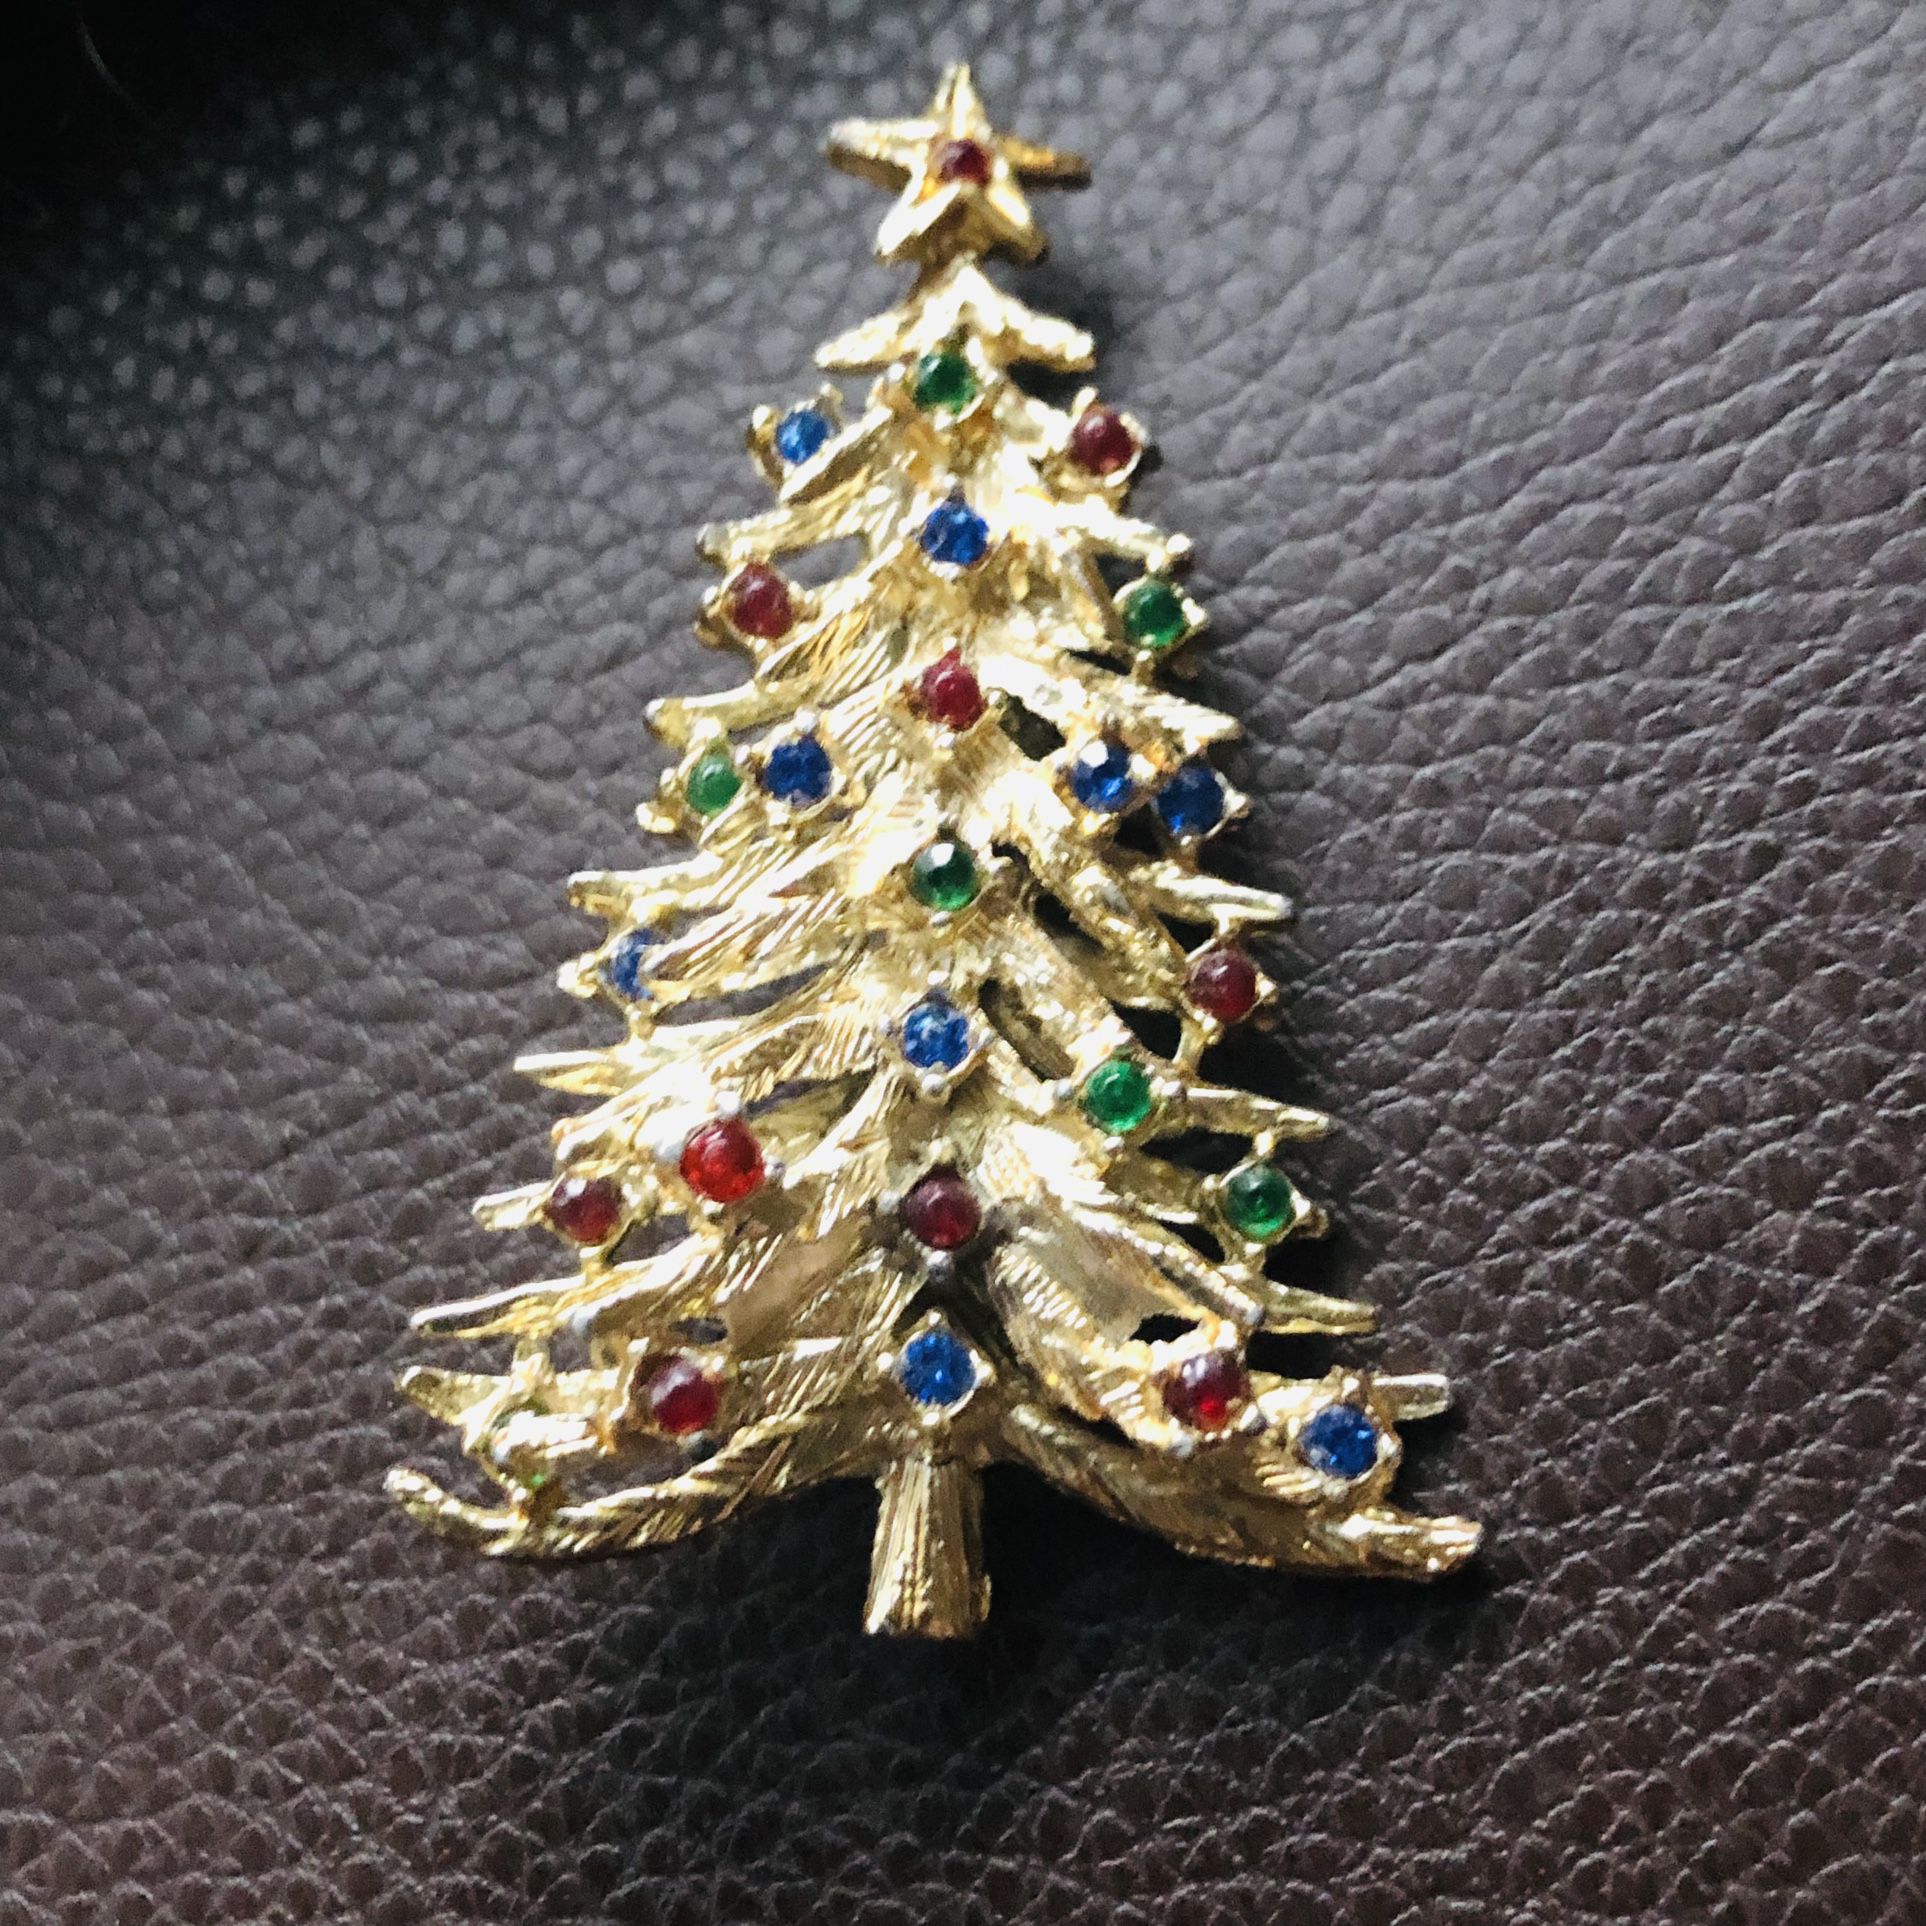 Vintage colorful stone ornament holiday Christmas tree brooch pin